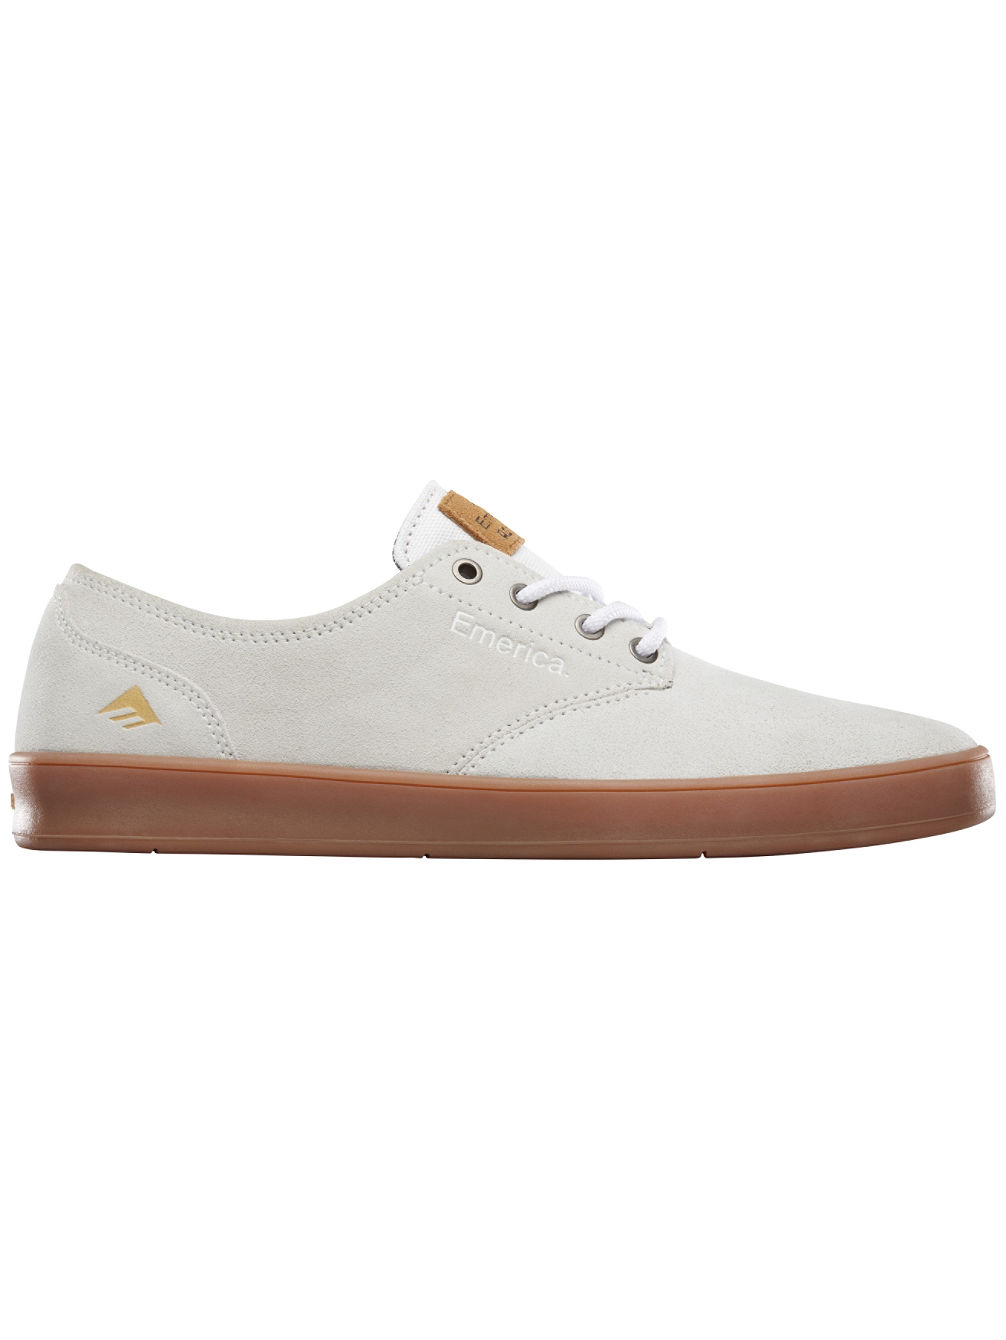 The Romero Laced Skate Shoes